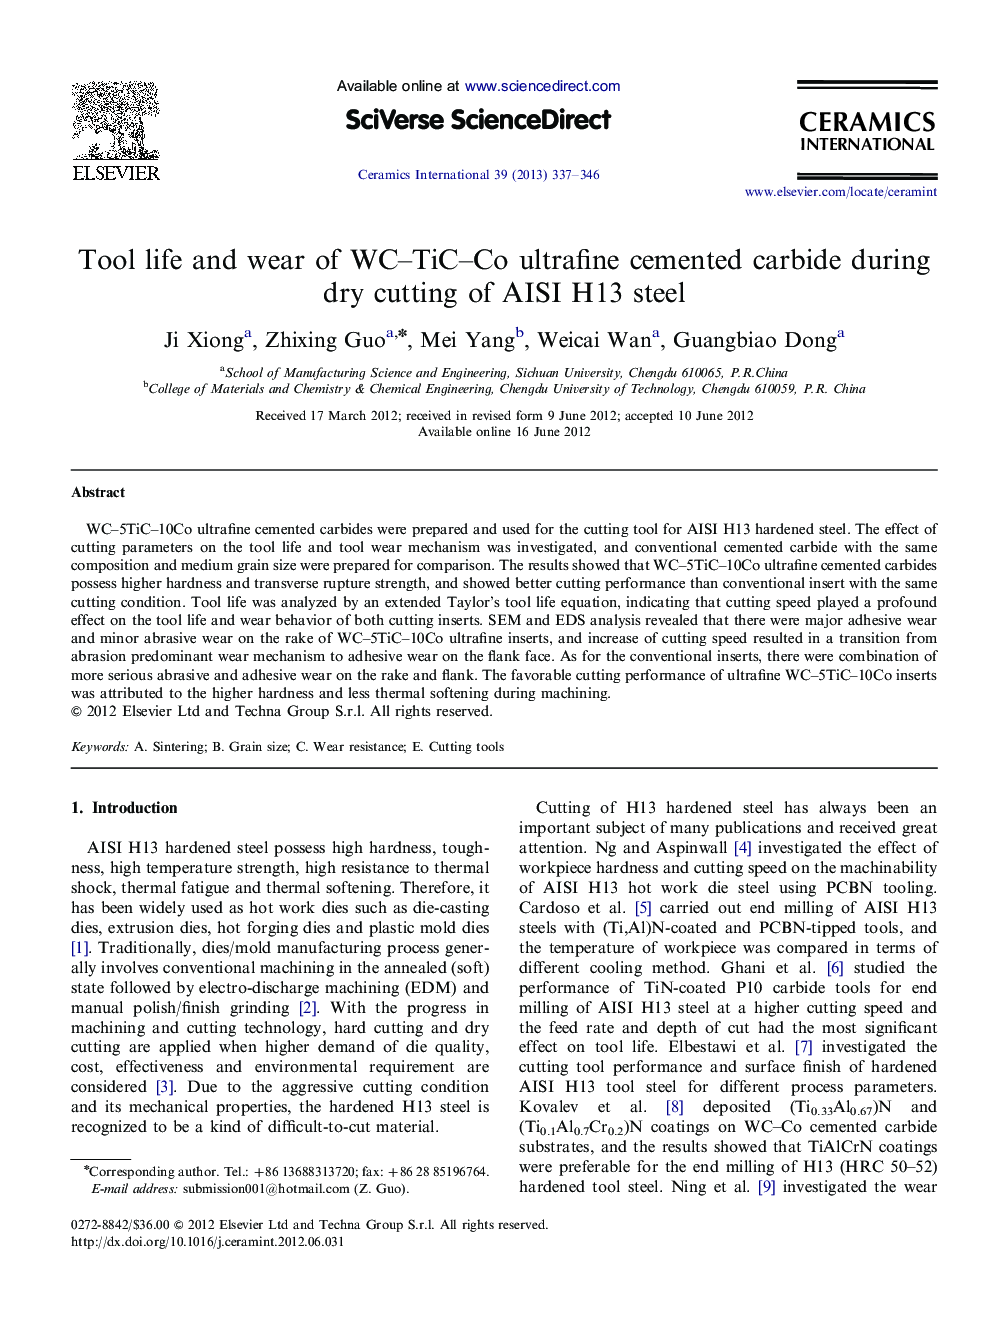 Tool life and wear of WC–TiC–Co ultrafine cemented carbide during dry cutting of AISI H13 steel